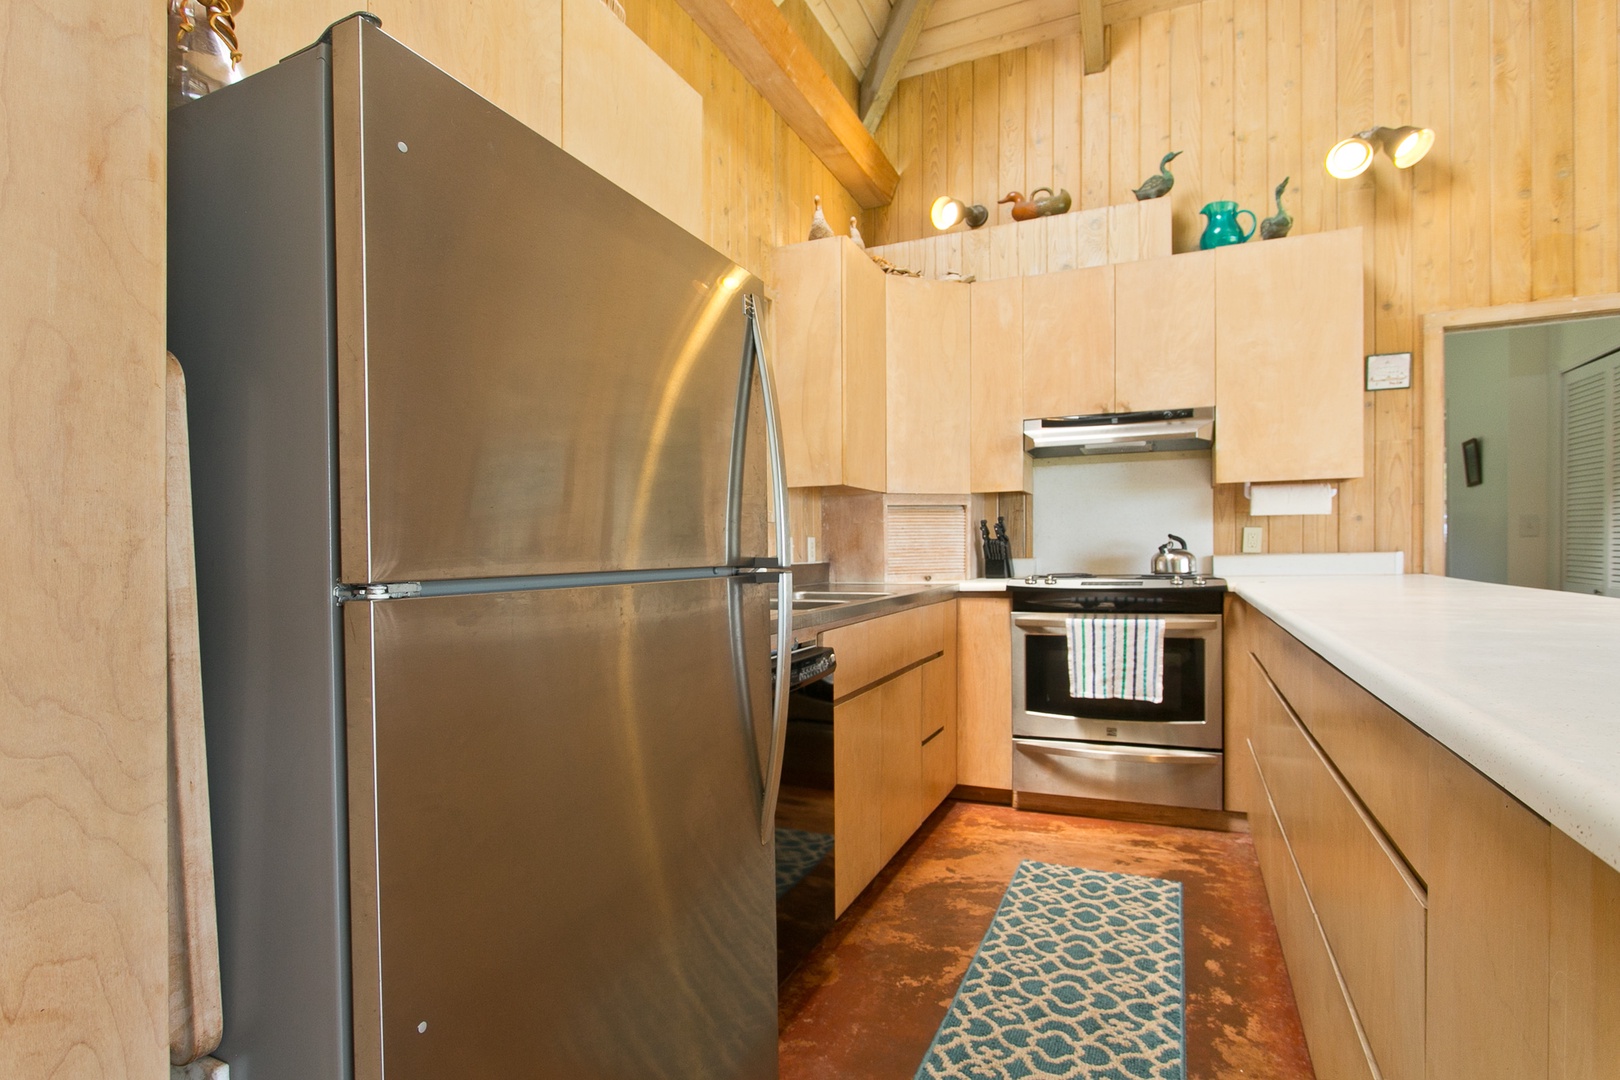 Laie Vacation Rentals, Waipuna Hale - Fully equipped kitchen.